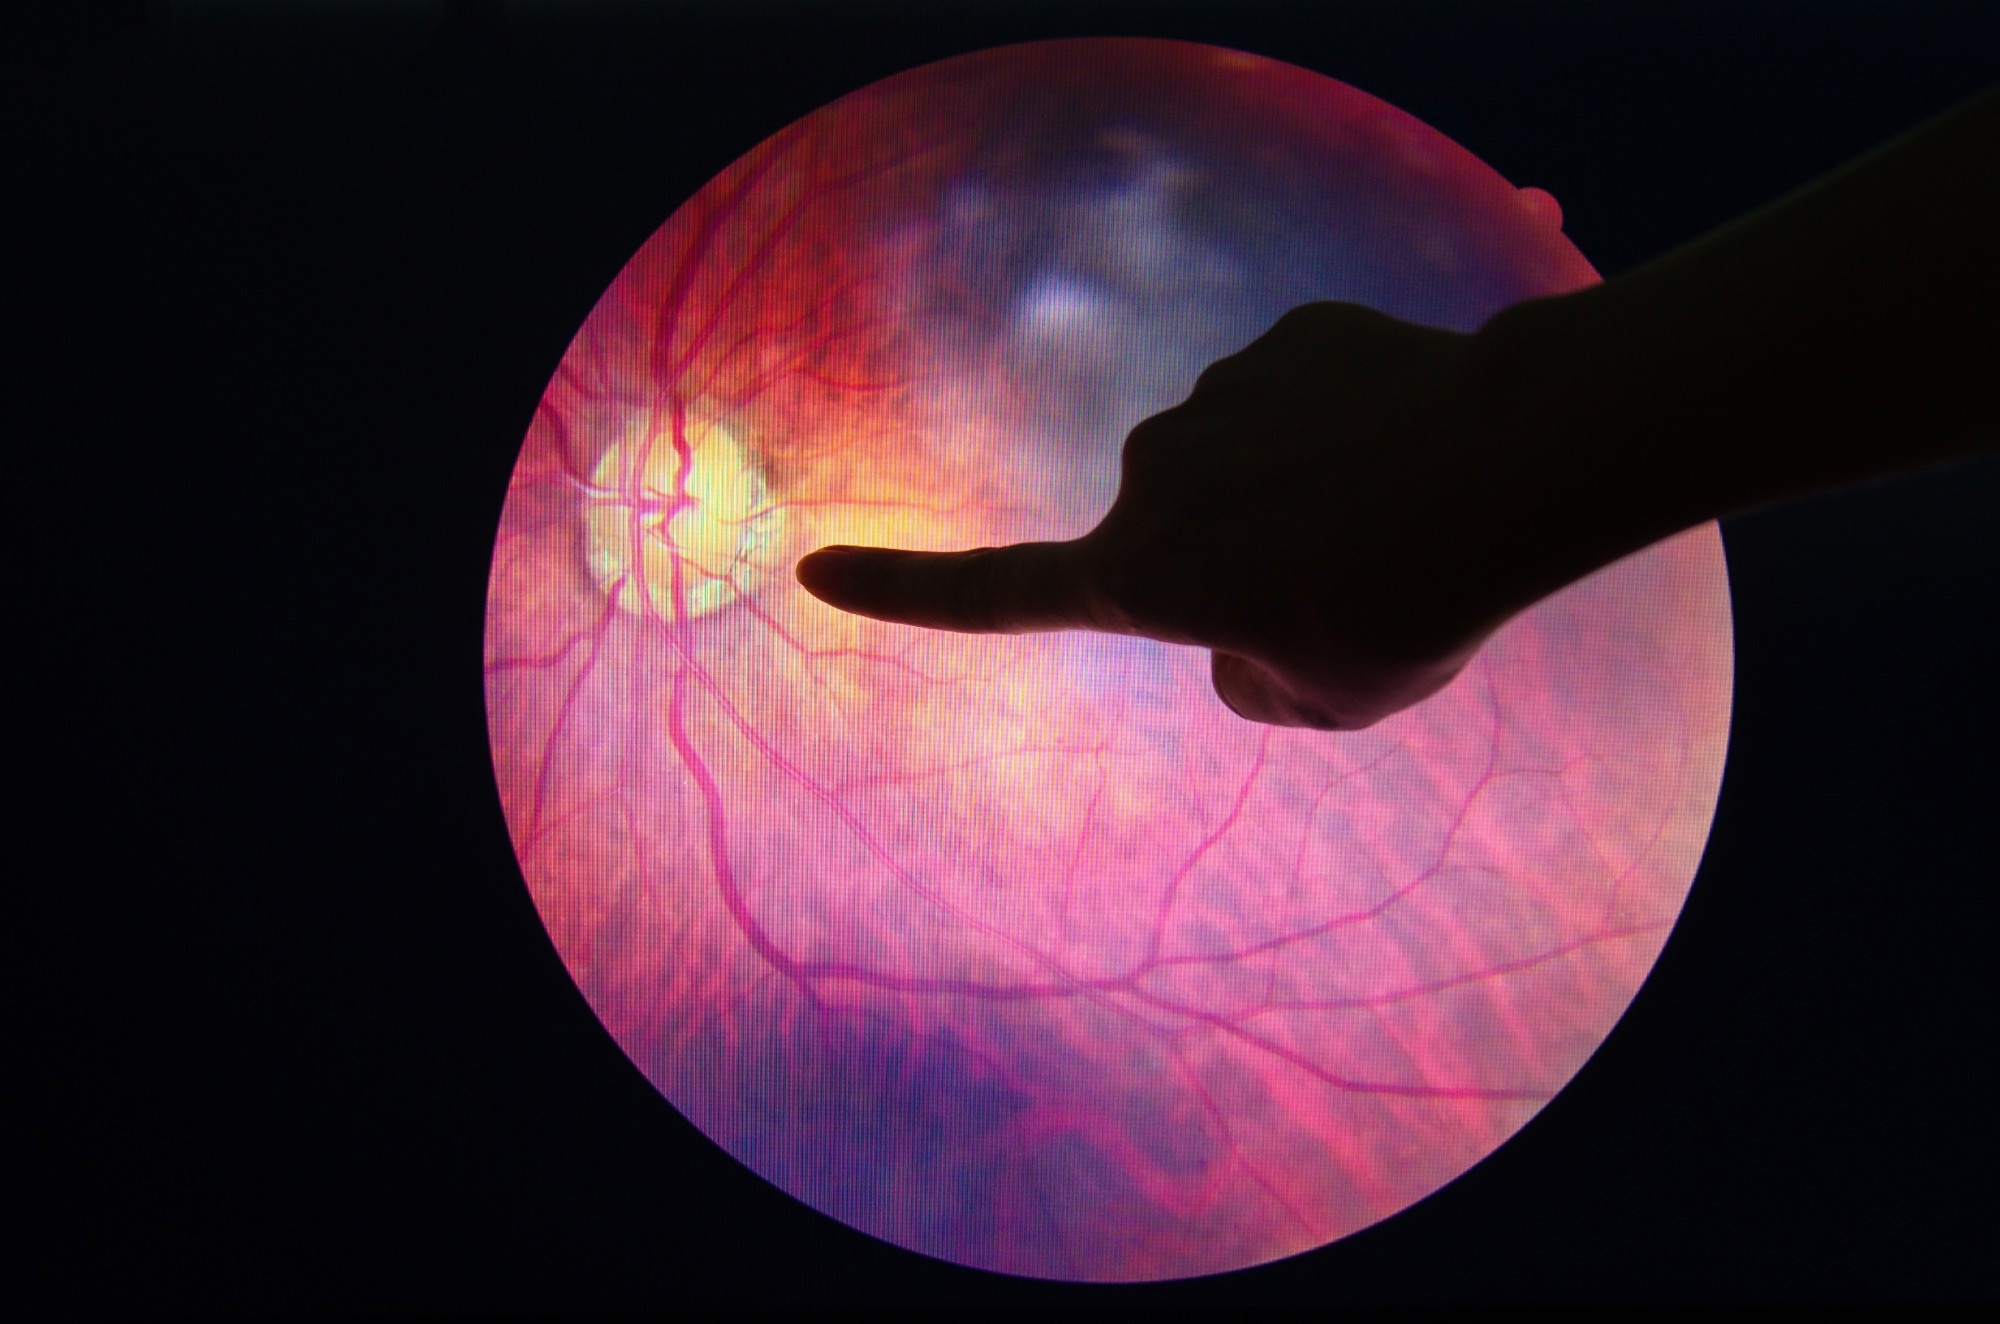 Study: A deep learning system for predicting time to progression of diabetic retinopathy. Image Credit: Anukool Manoton / Shutterstock